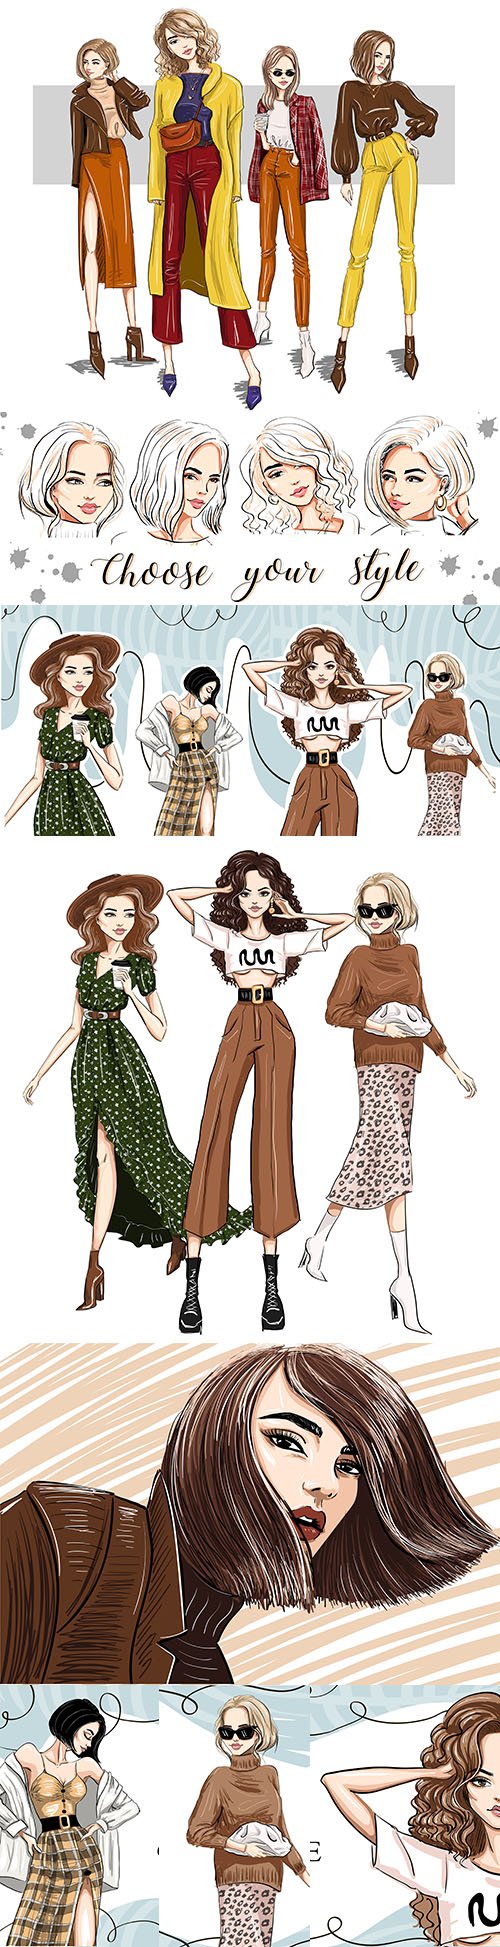 Bright models girls in fashion outfits drawn illustrations